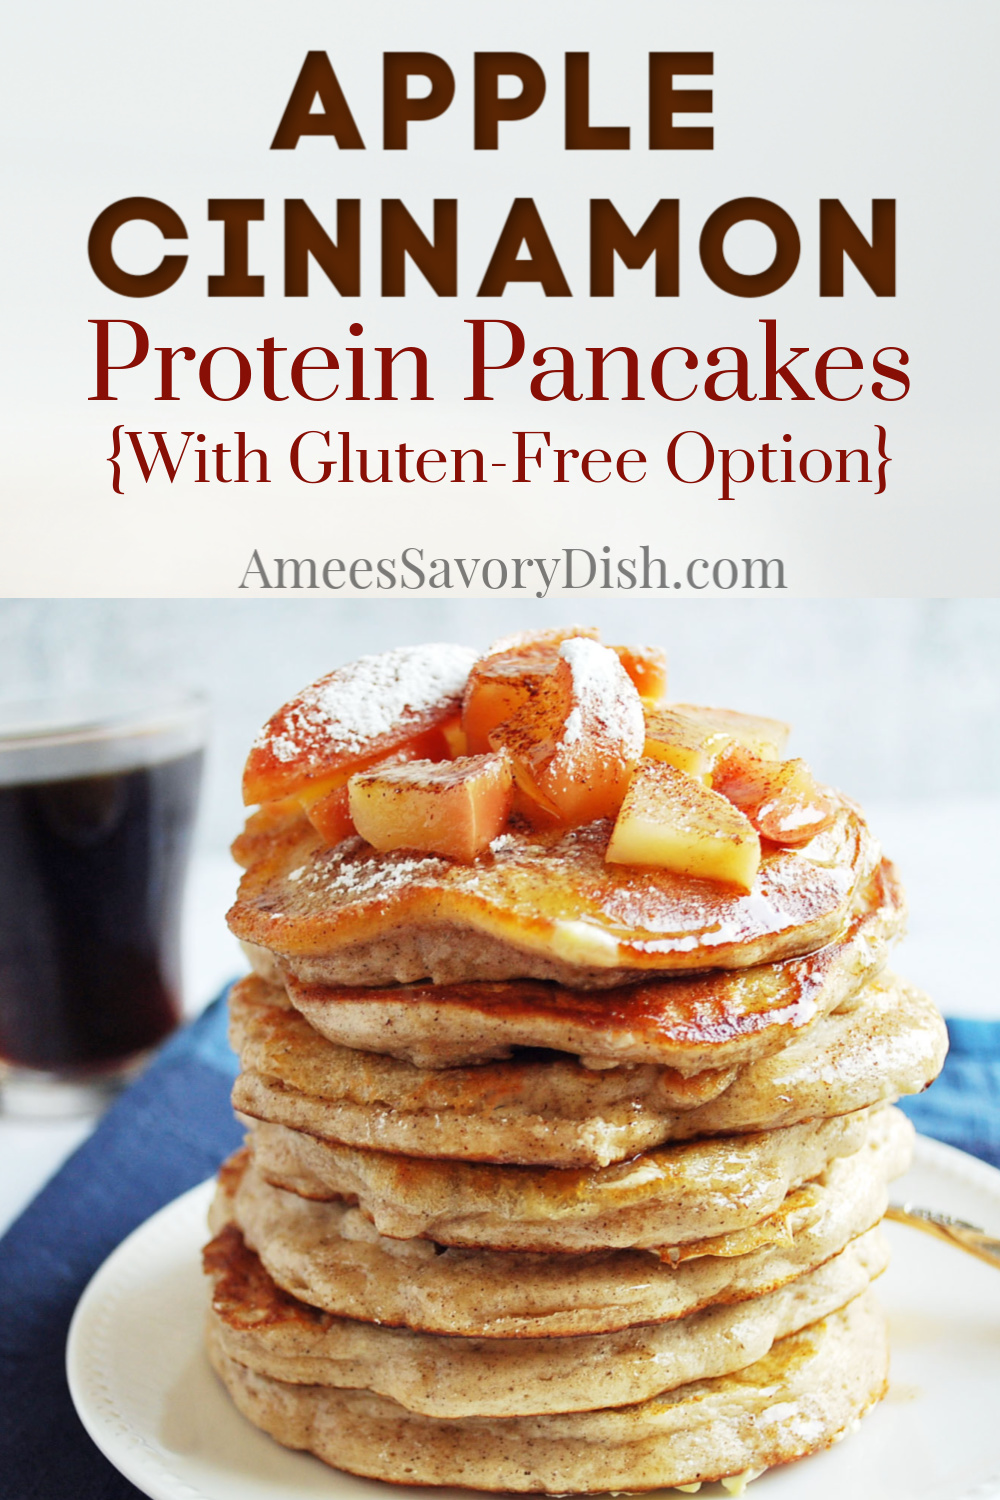 A flavorful protein pancake recipe made with pancake mix, protein powder, chopped apples, cinnamon, and buttermilk.  These protein-packed pancakes are perfect for meal prep with 31 grams of protein per serving! #proteinpancakes #pancakes #applepancakes #pancakerecipe #proteinrecipes via @Ameessavorydish